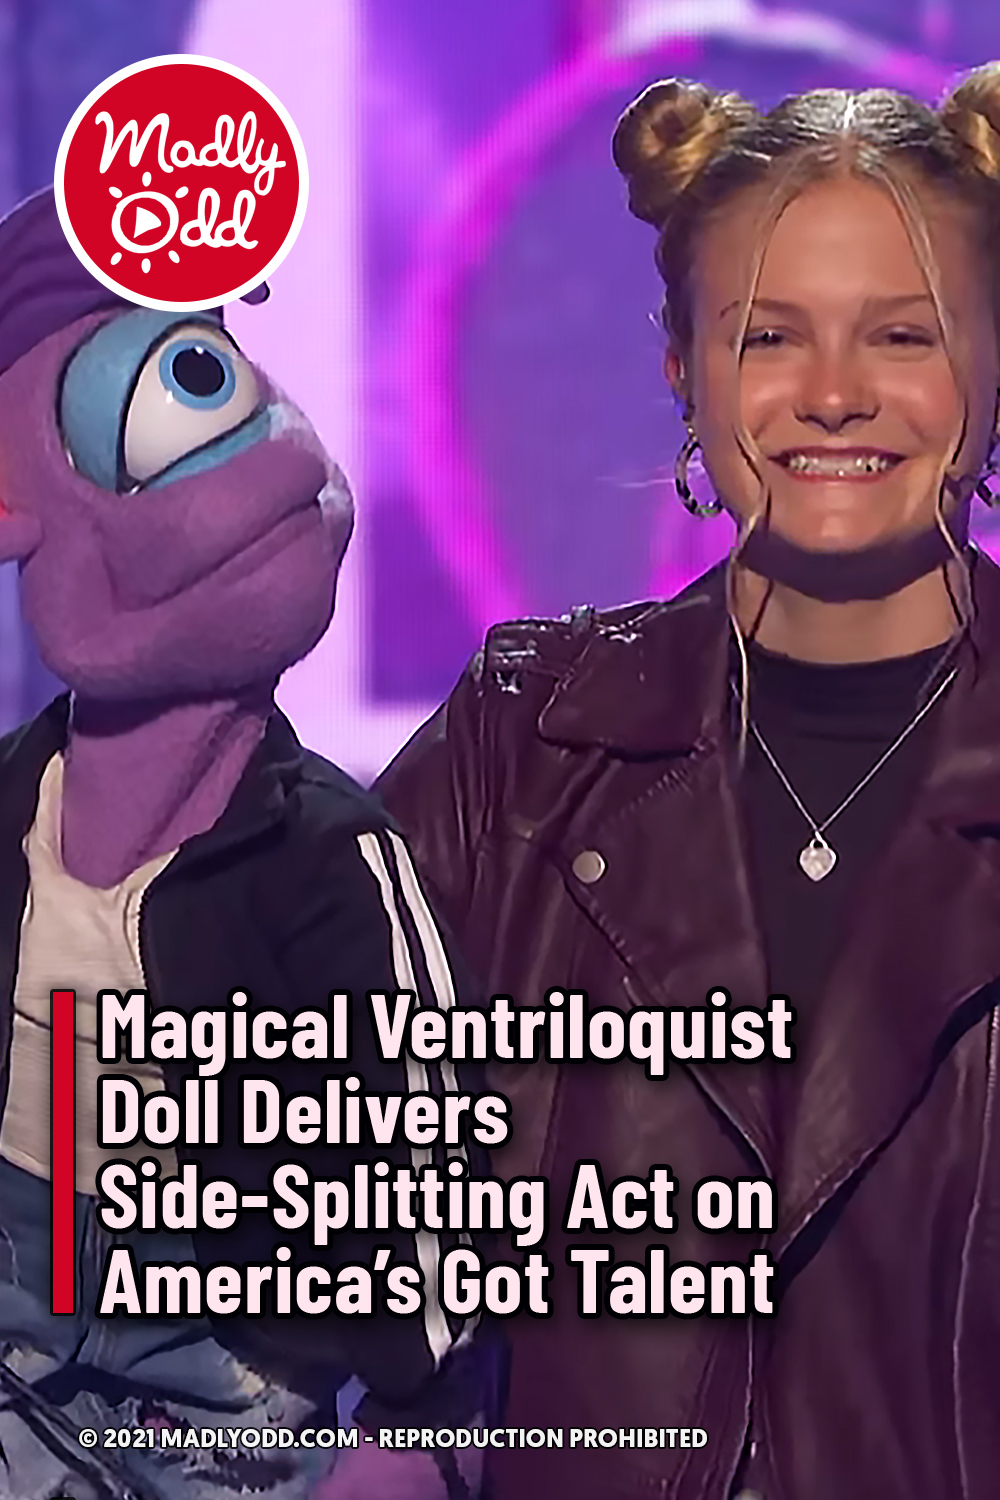 Magical Ventriloquist Doll Delivers Side-Splitting Act on America’s Got Talent